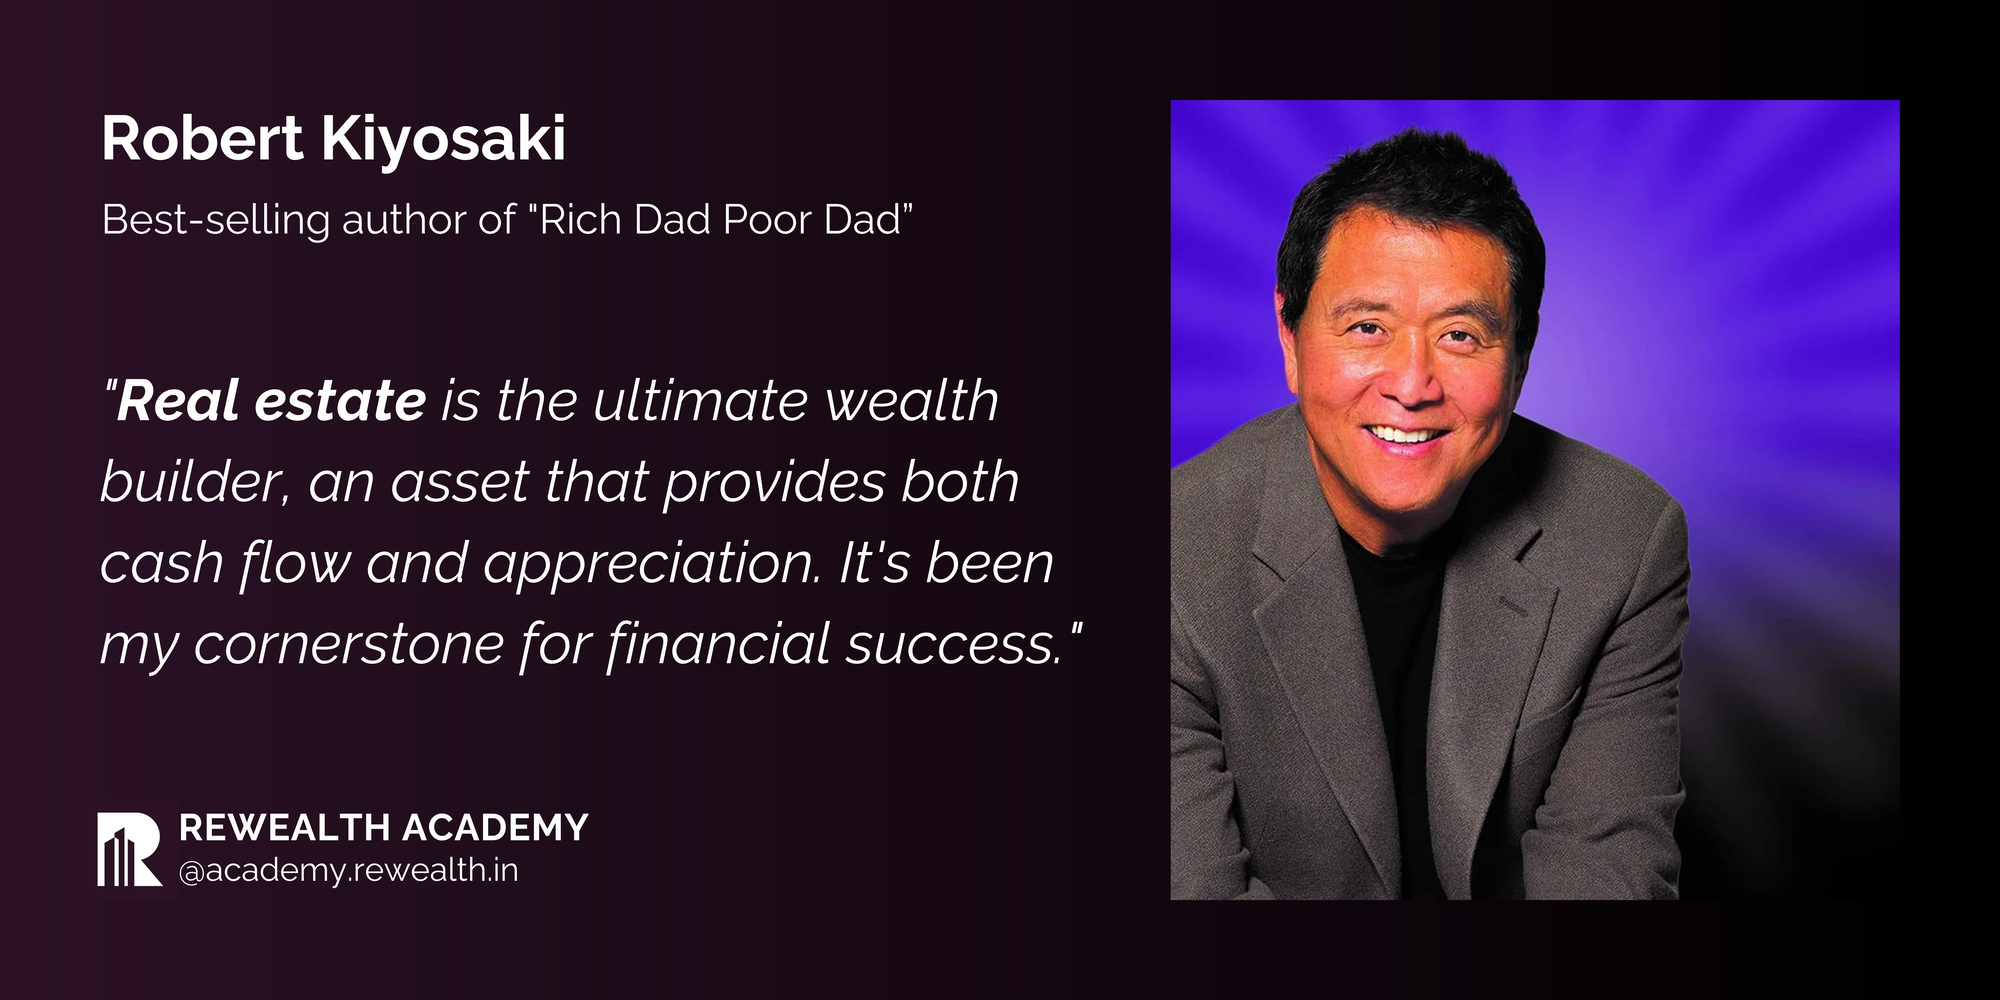 Real Estate Investment in India Quotes by Robert Kiyosaki on Rewealth